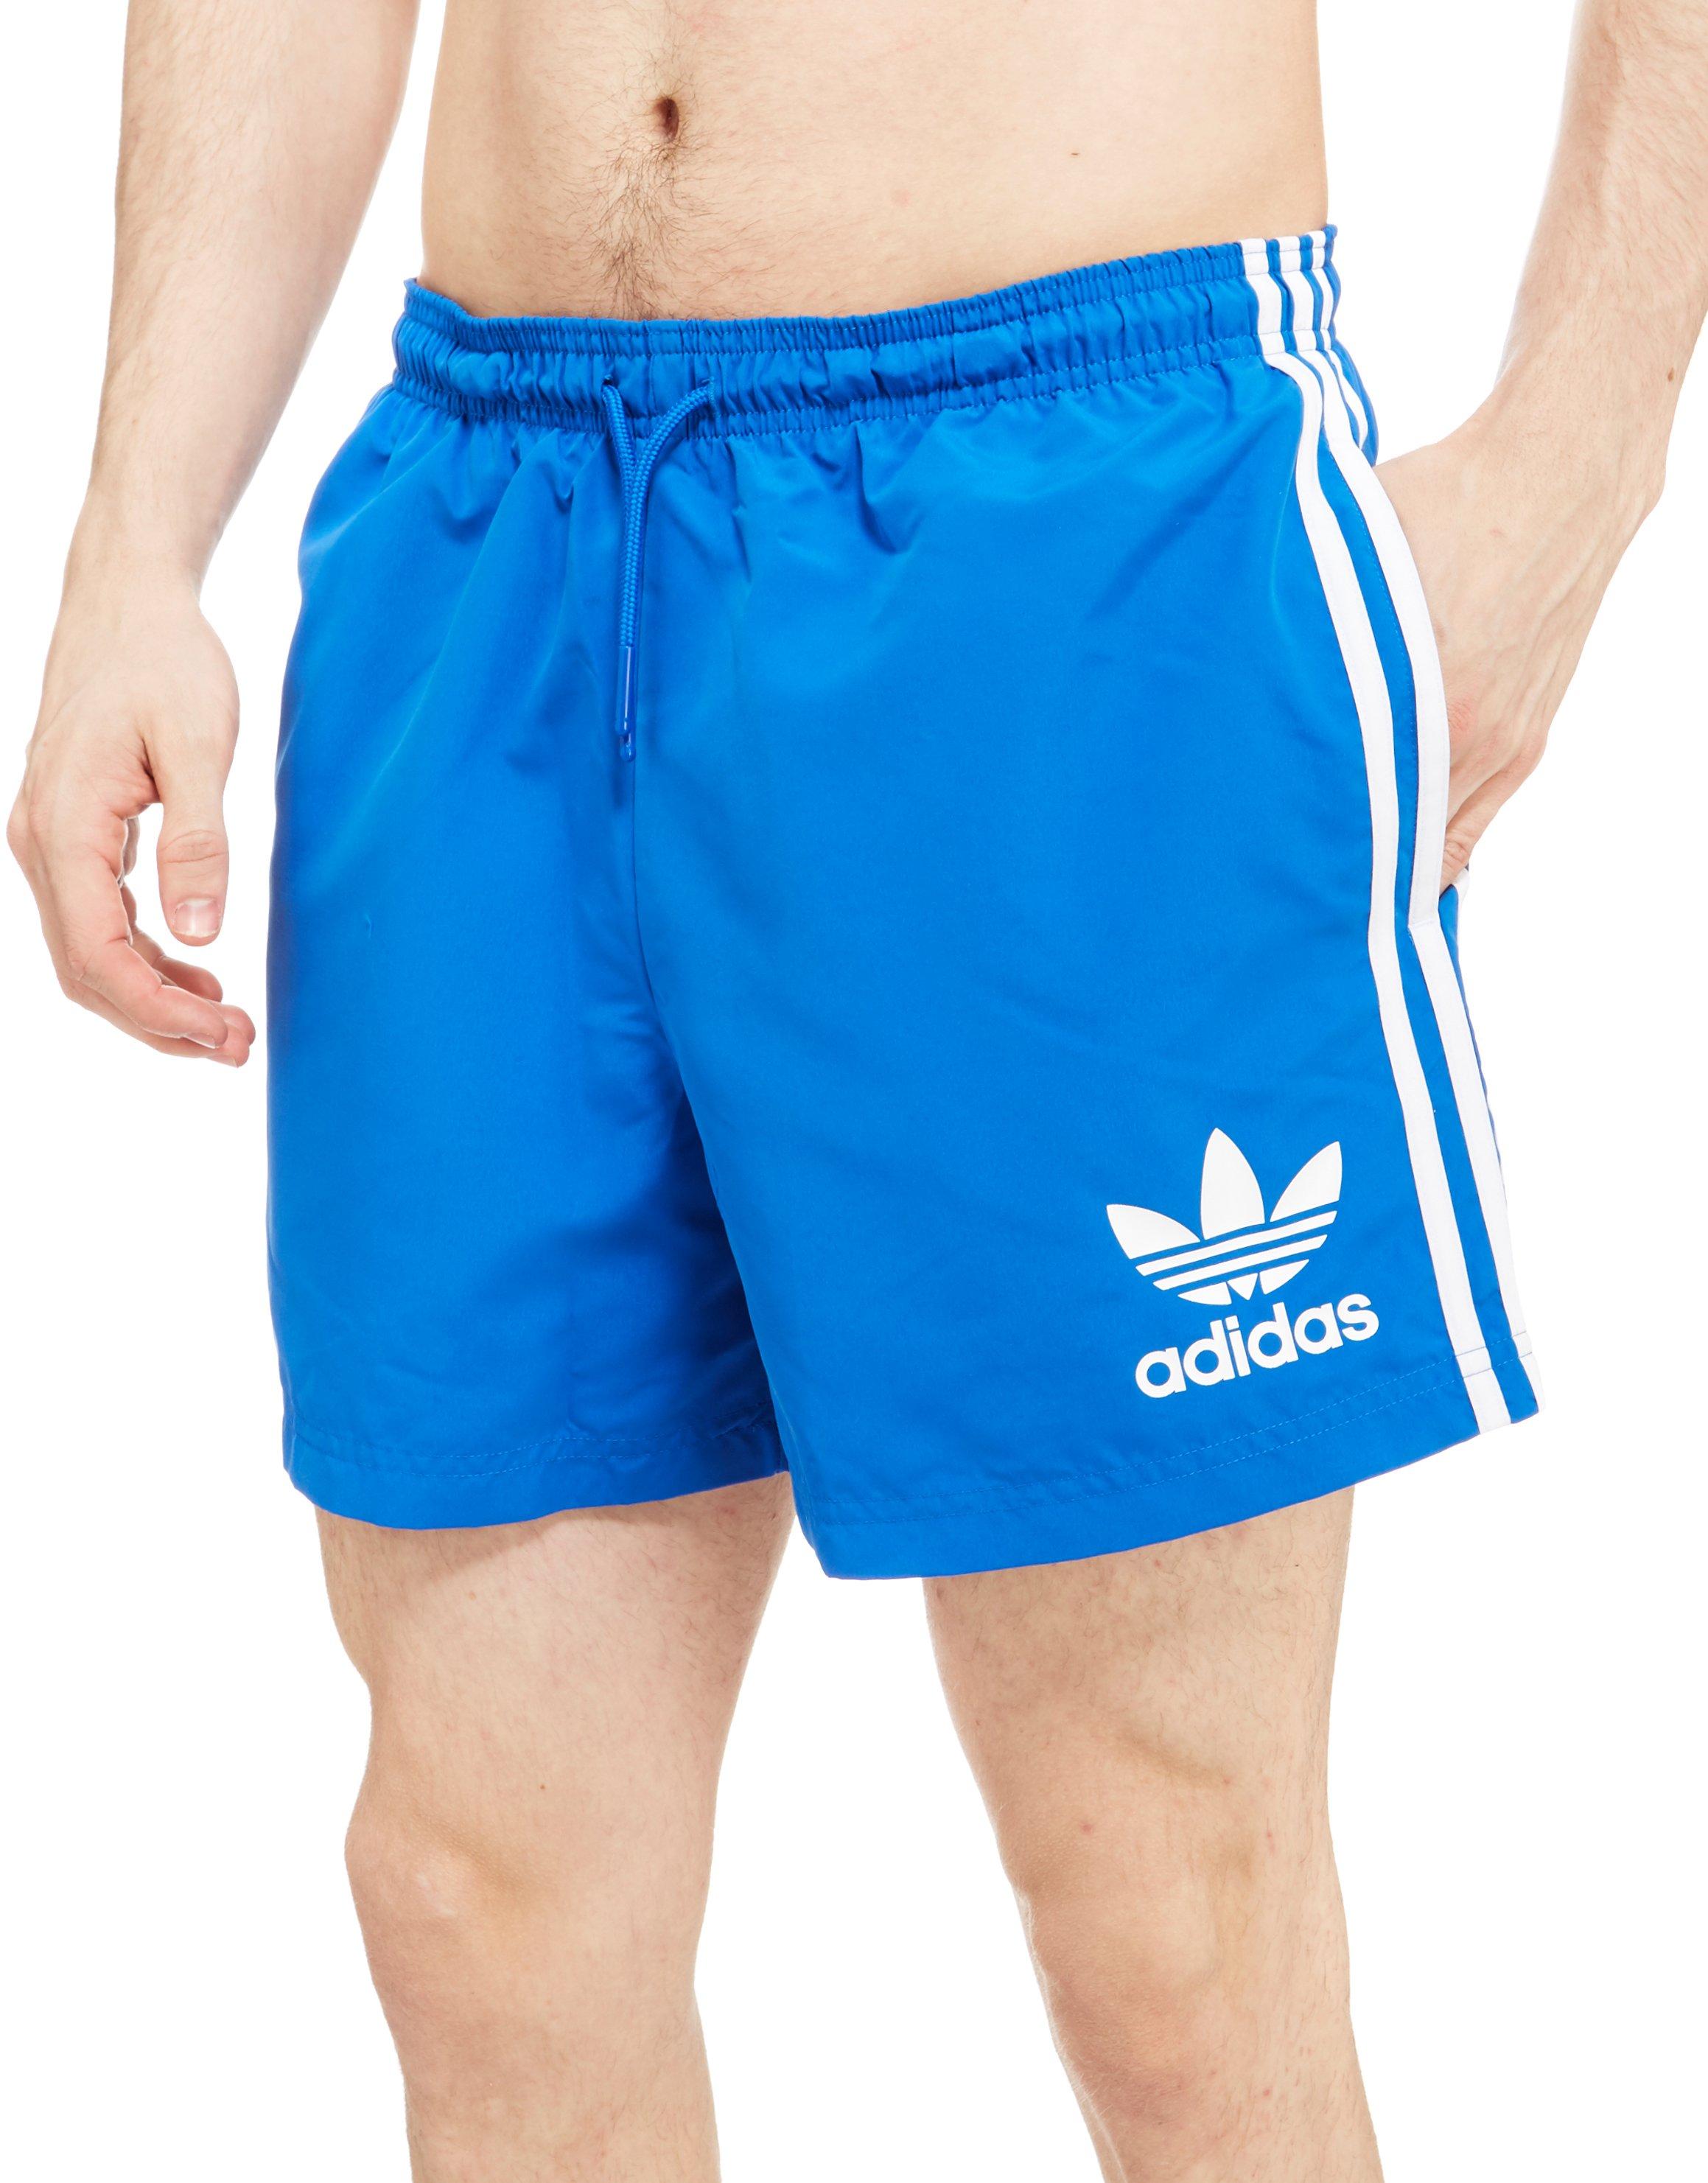 How to select mens swim shorts